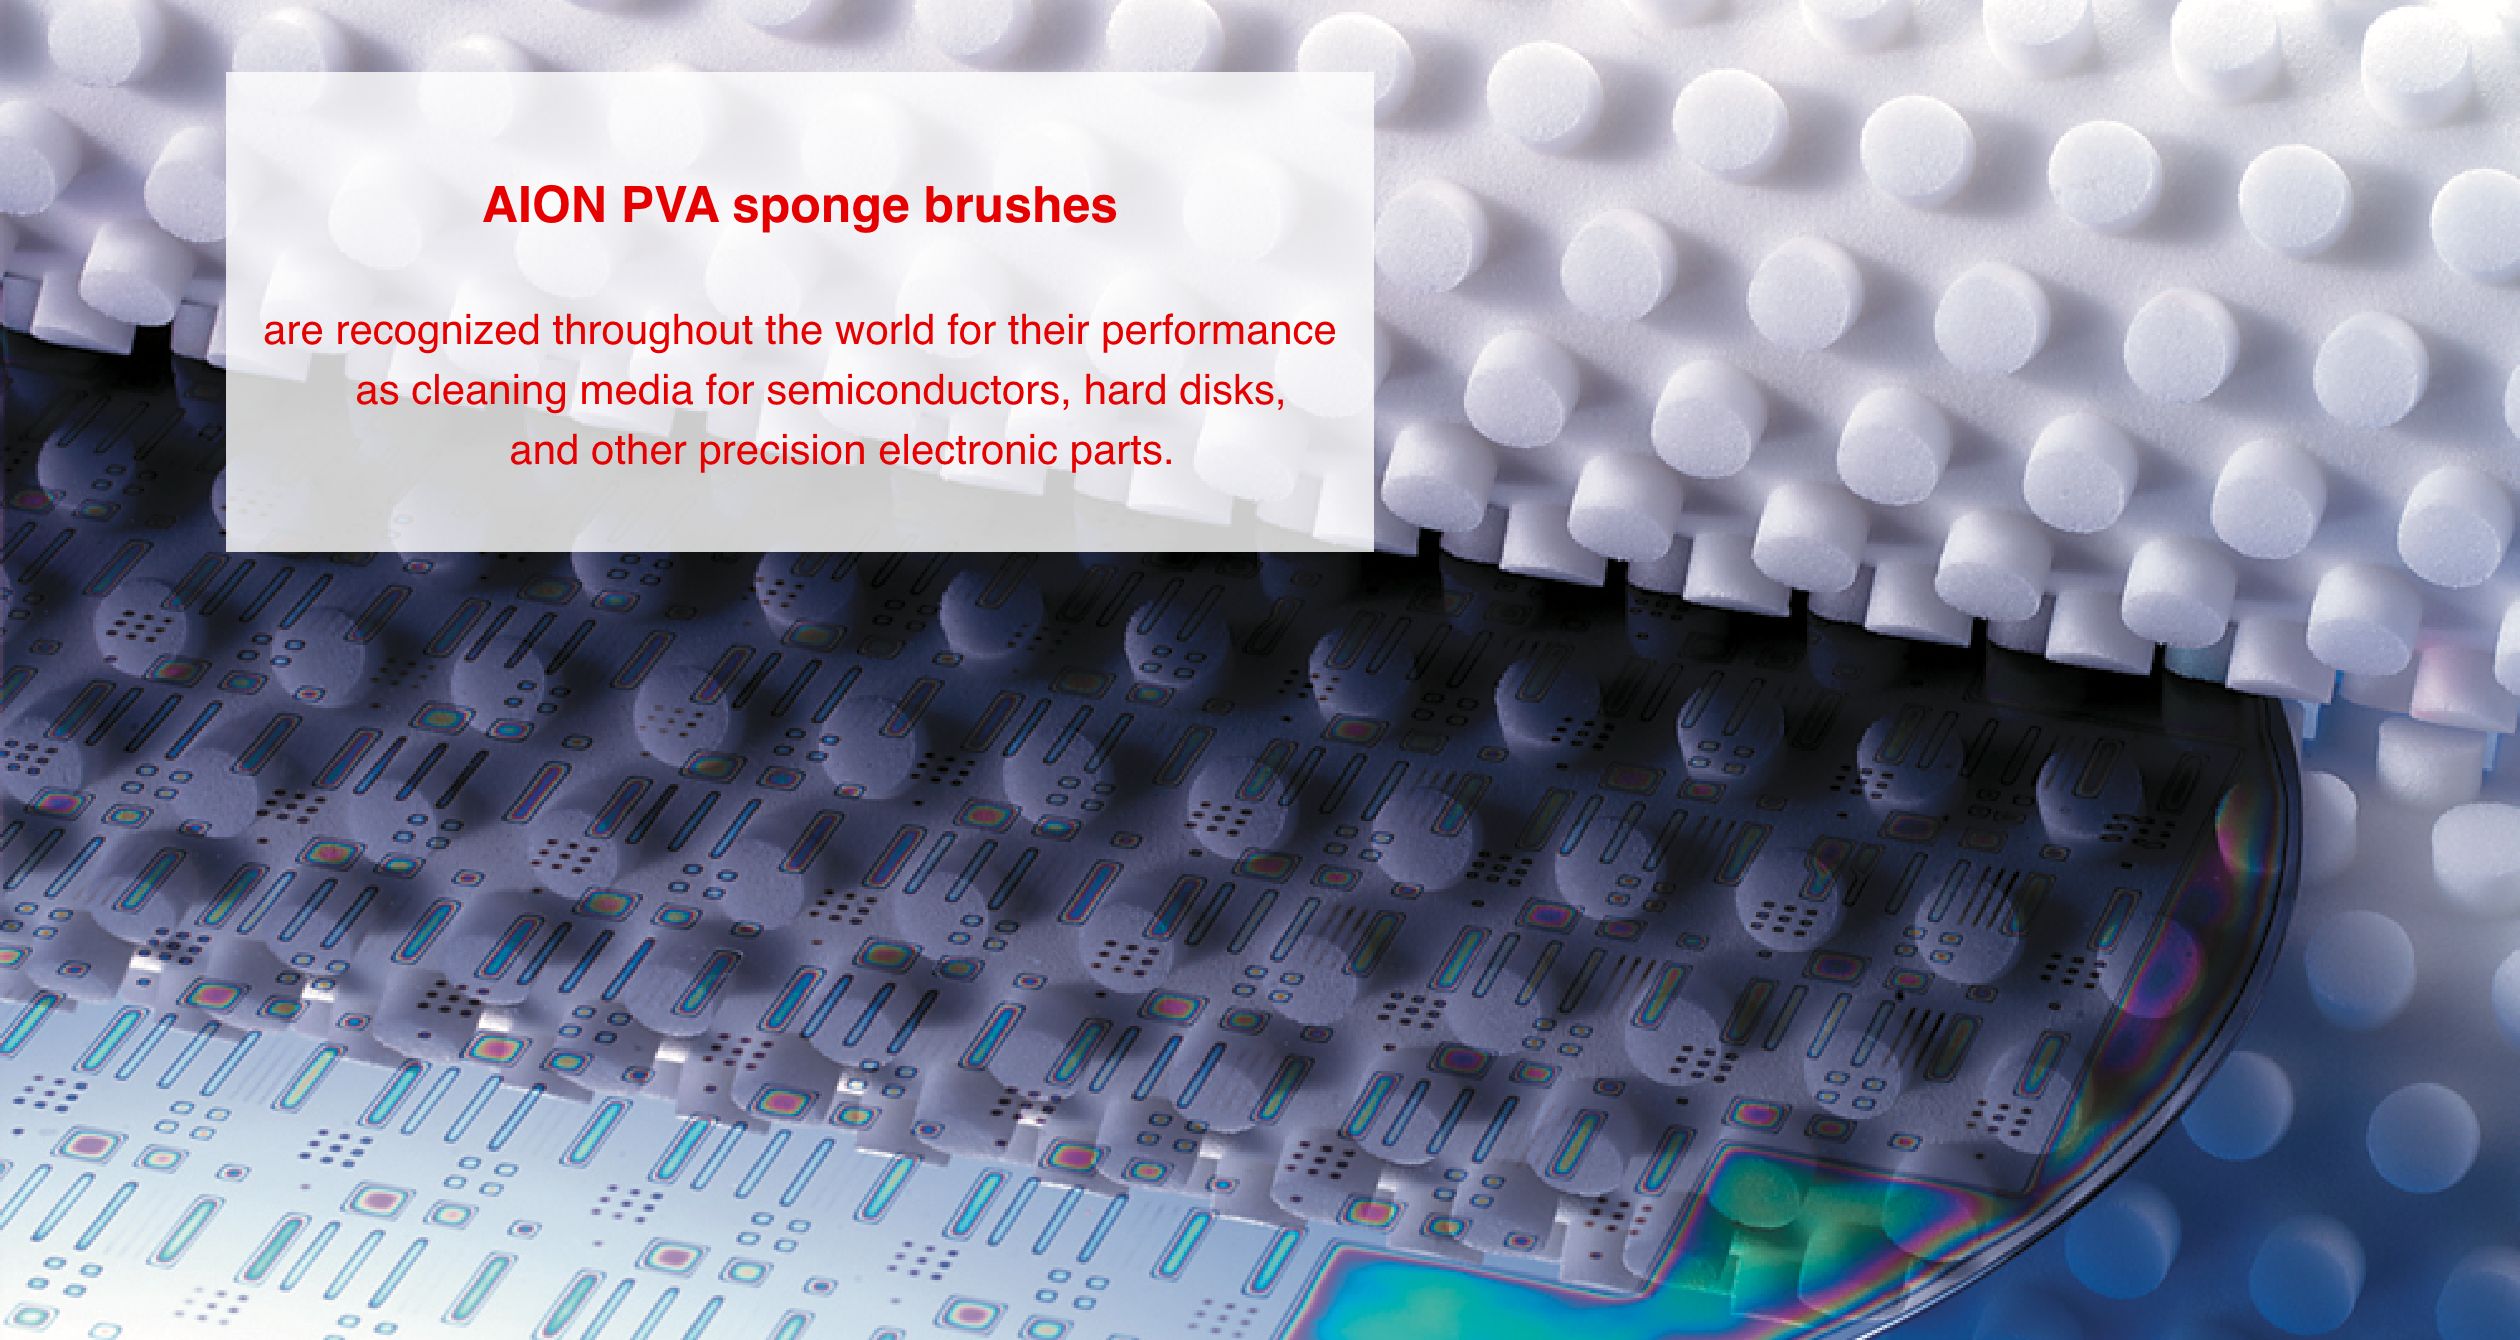 AION PVA sponge brushes are recognized throughout the world for their performance as cleaning media for semiconductors, hard disks, and other precision electronic parts.